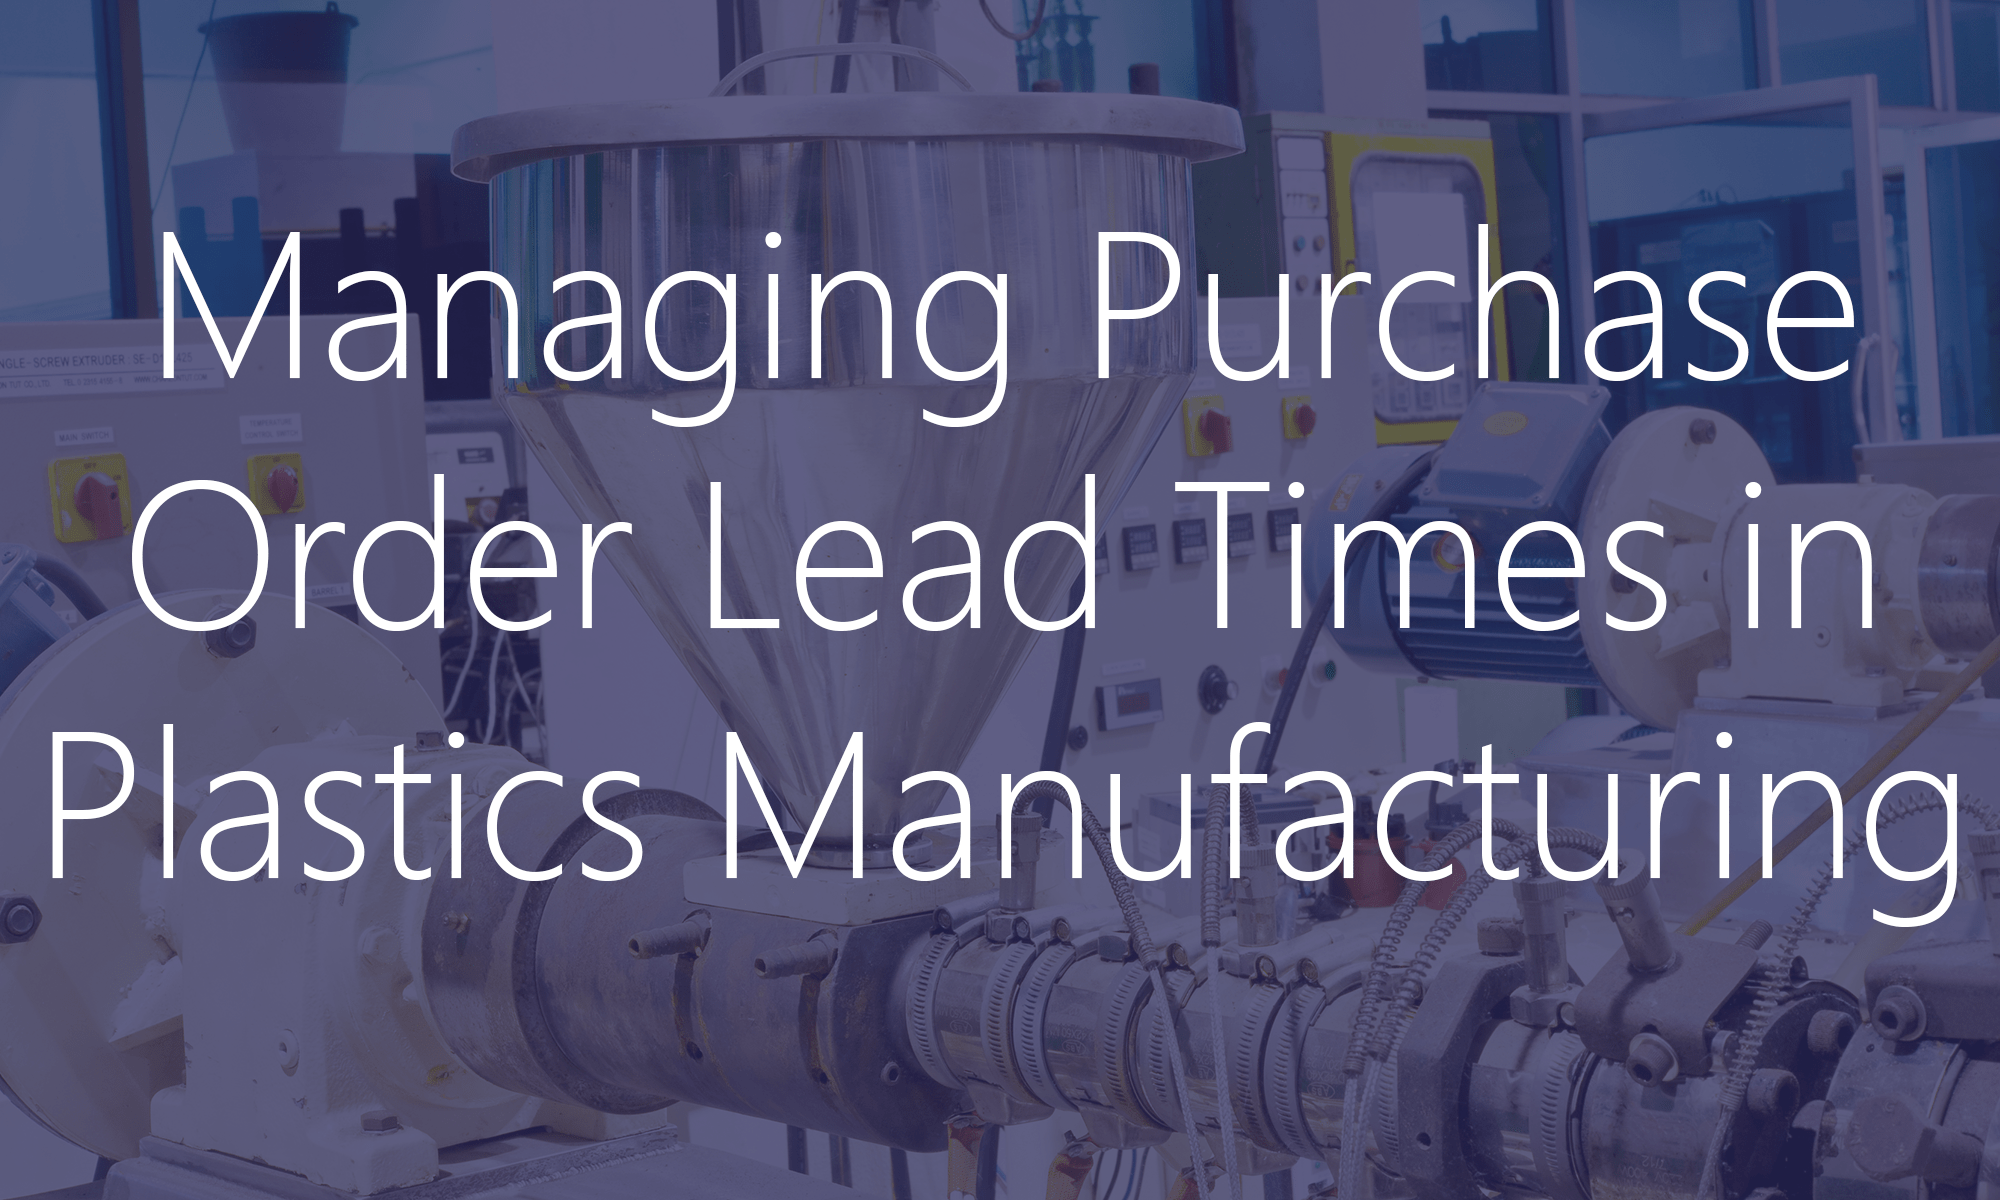 Managing Purchase Order Lead Times in Plastics Manufacturing